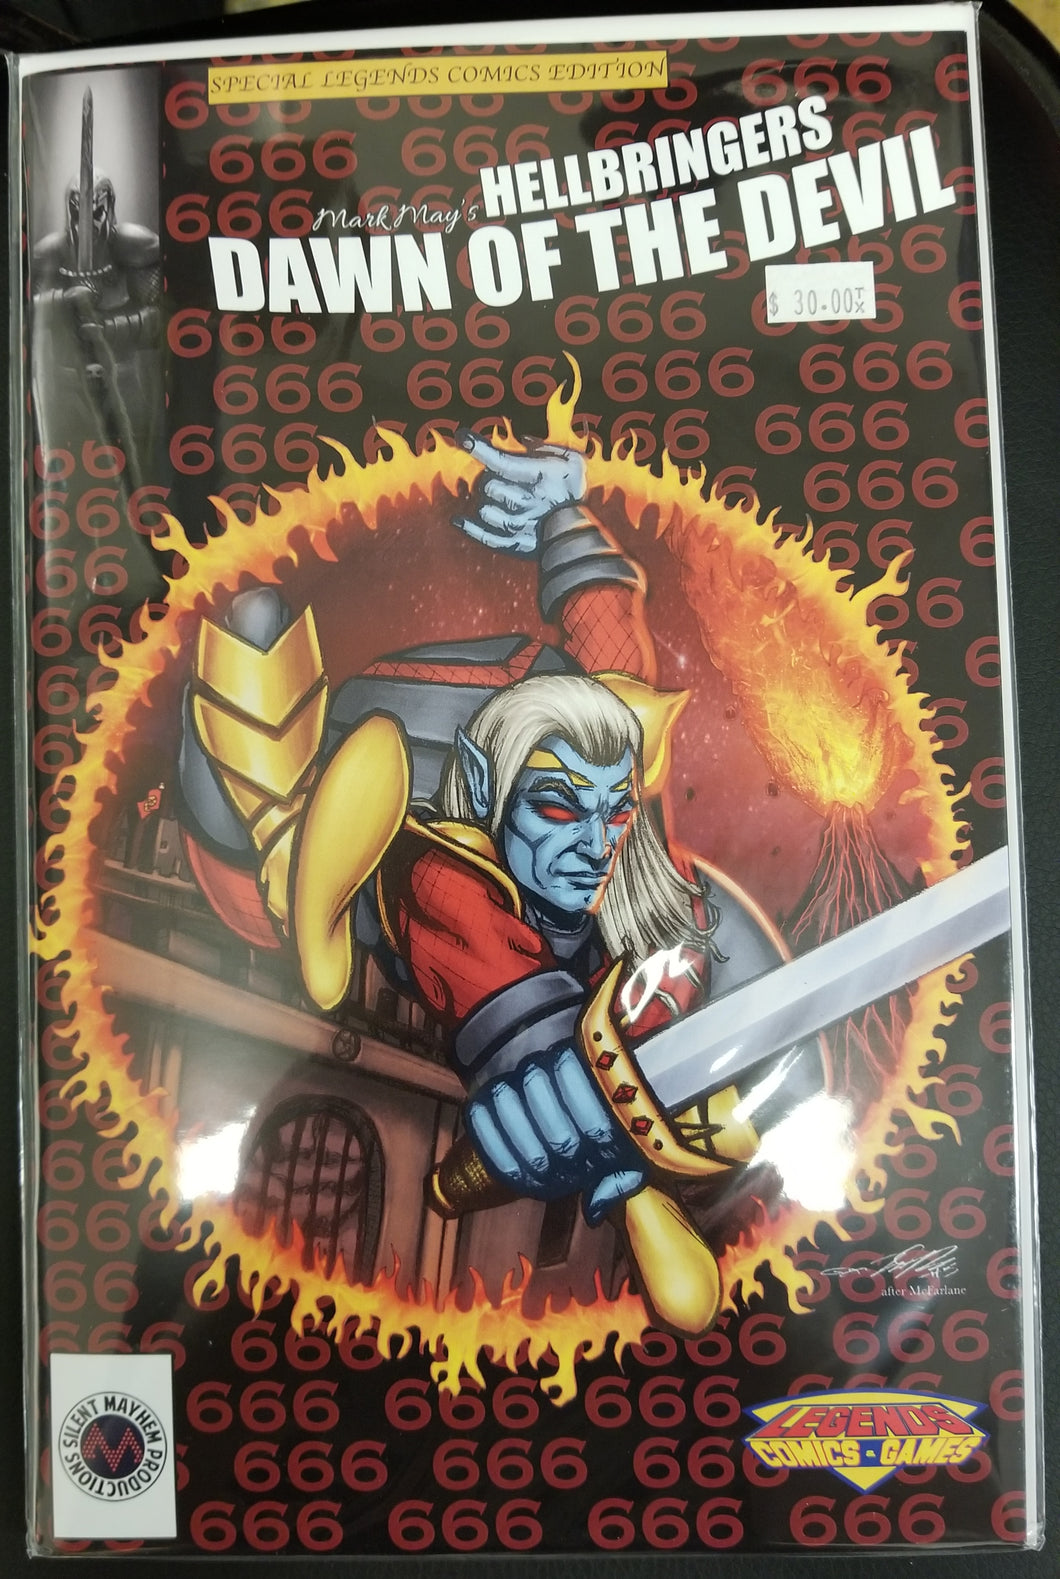 Mark May's Hellbringers Dawn of the Devil Special Legends Comics Edition Trade Dress Version